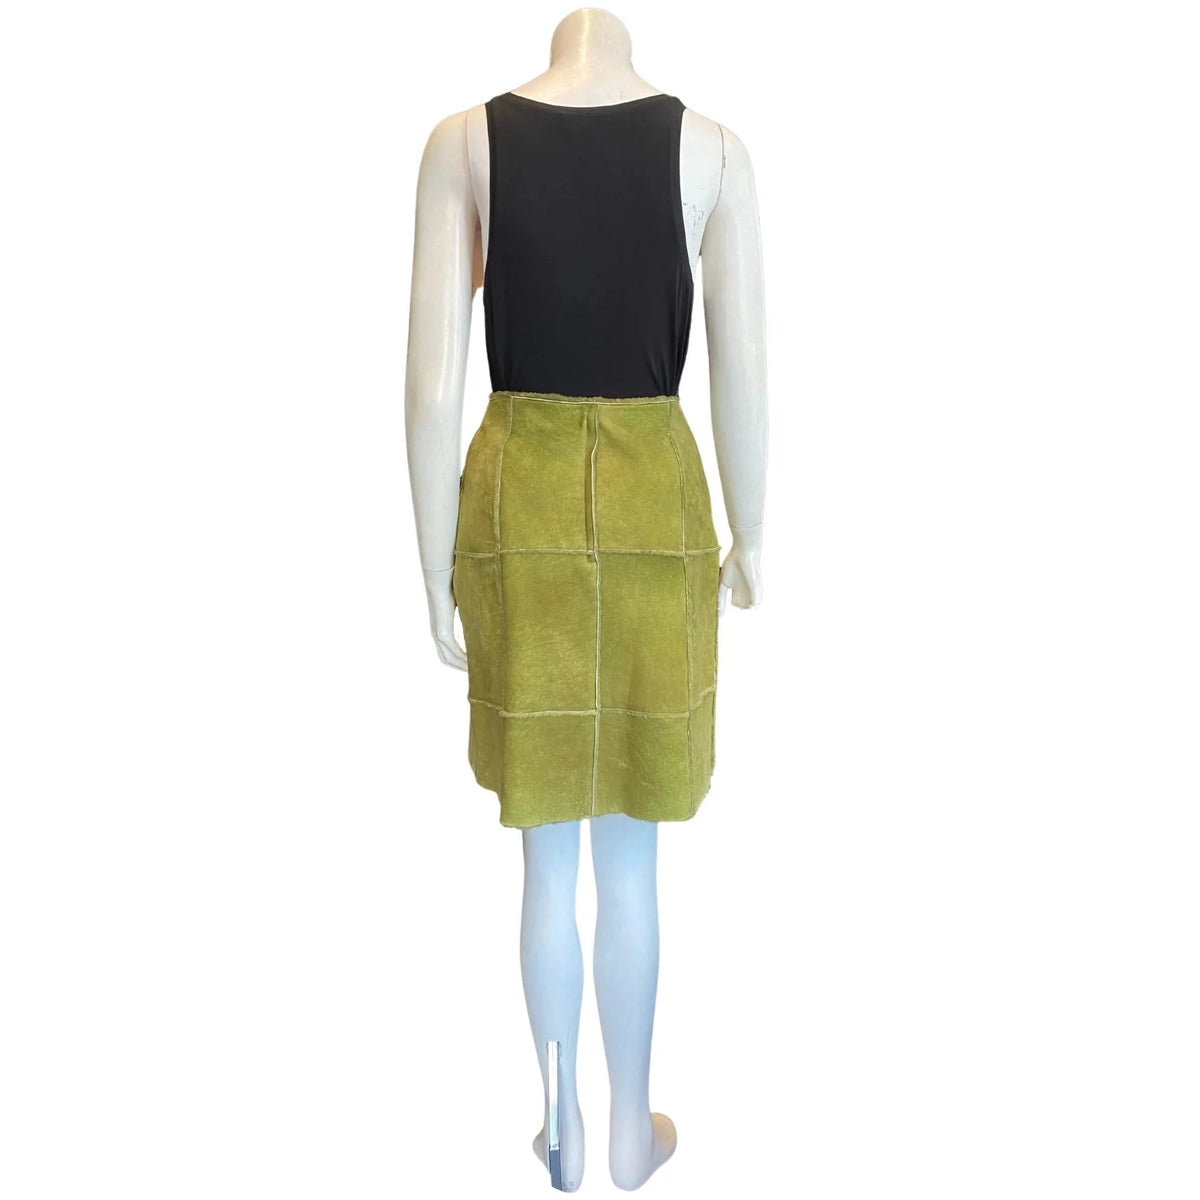 Pre-Owned CHANEL Fall ‘00 Lambswool Shearling Skirt | Small - FR 36 - US 4 - theREMODA